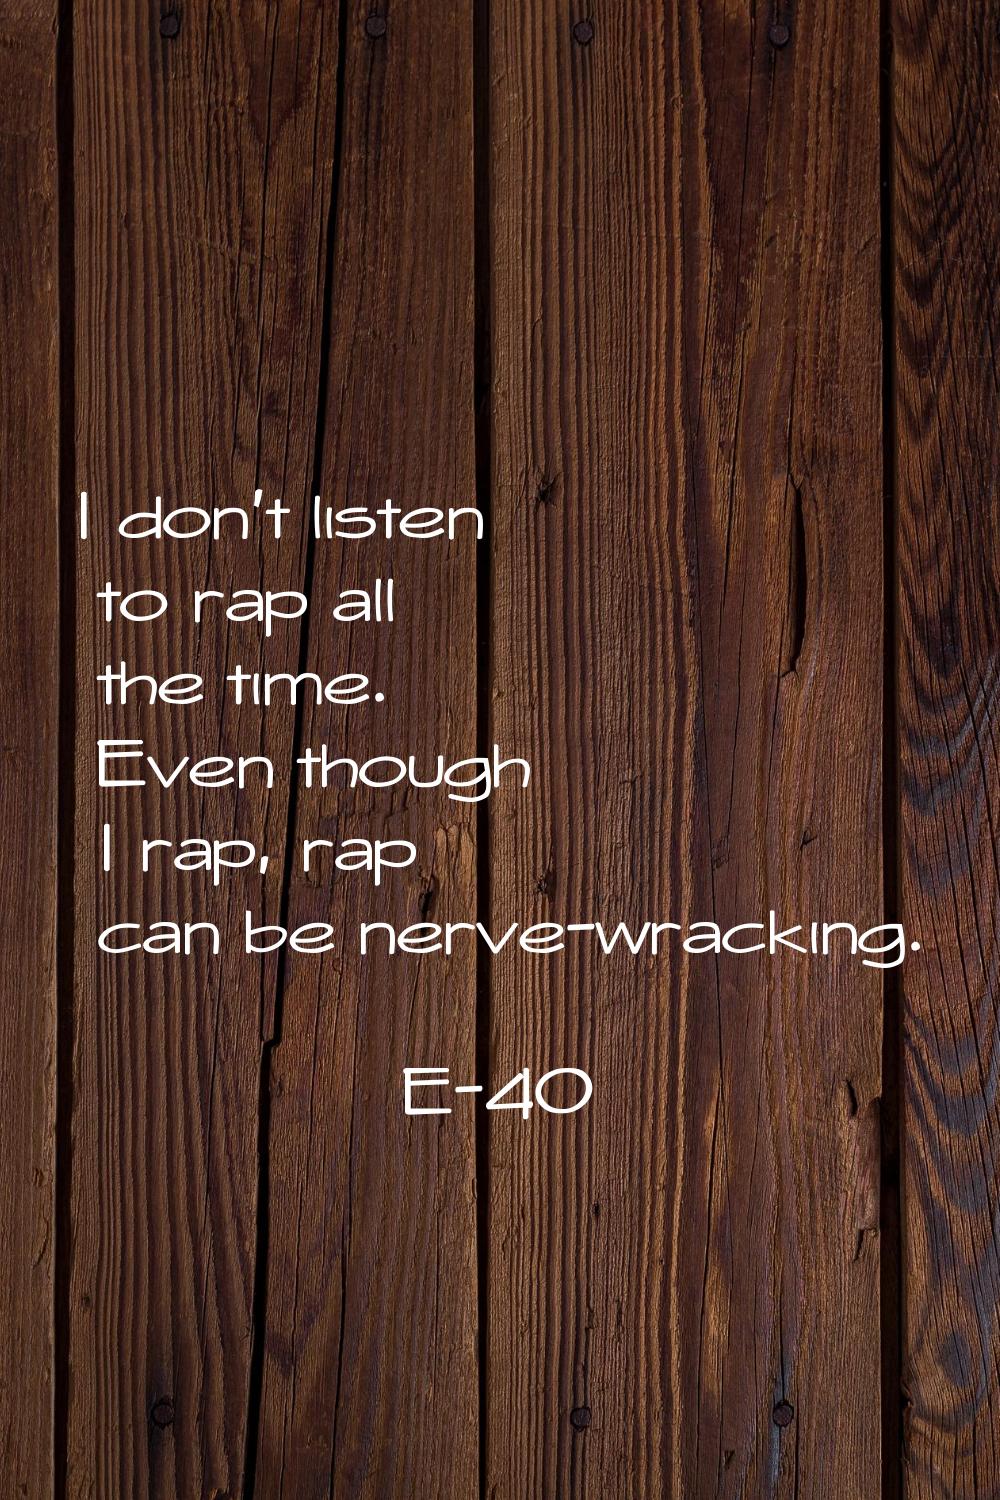 I don't listen to rap all the time. Even though I rap, rap can be nerve-wracking.